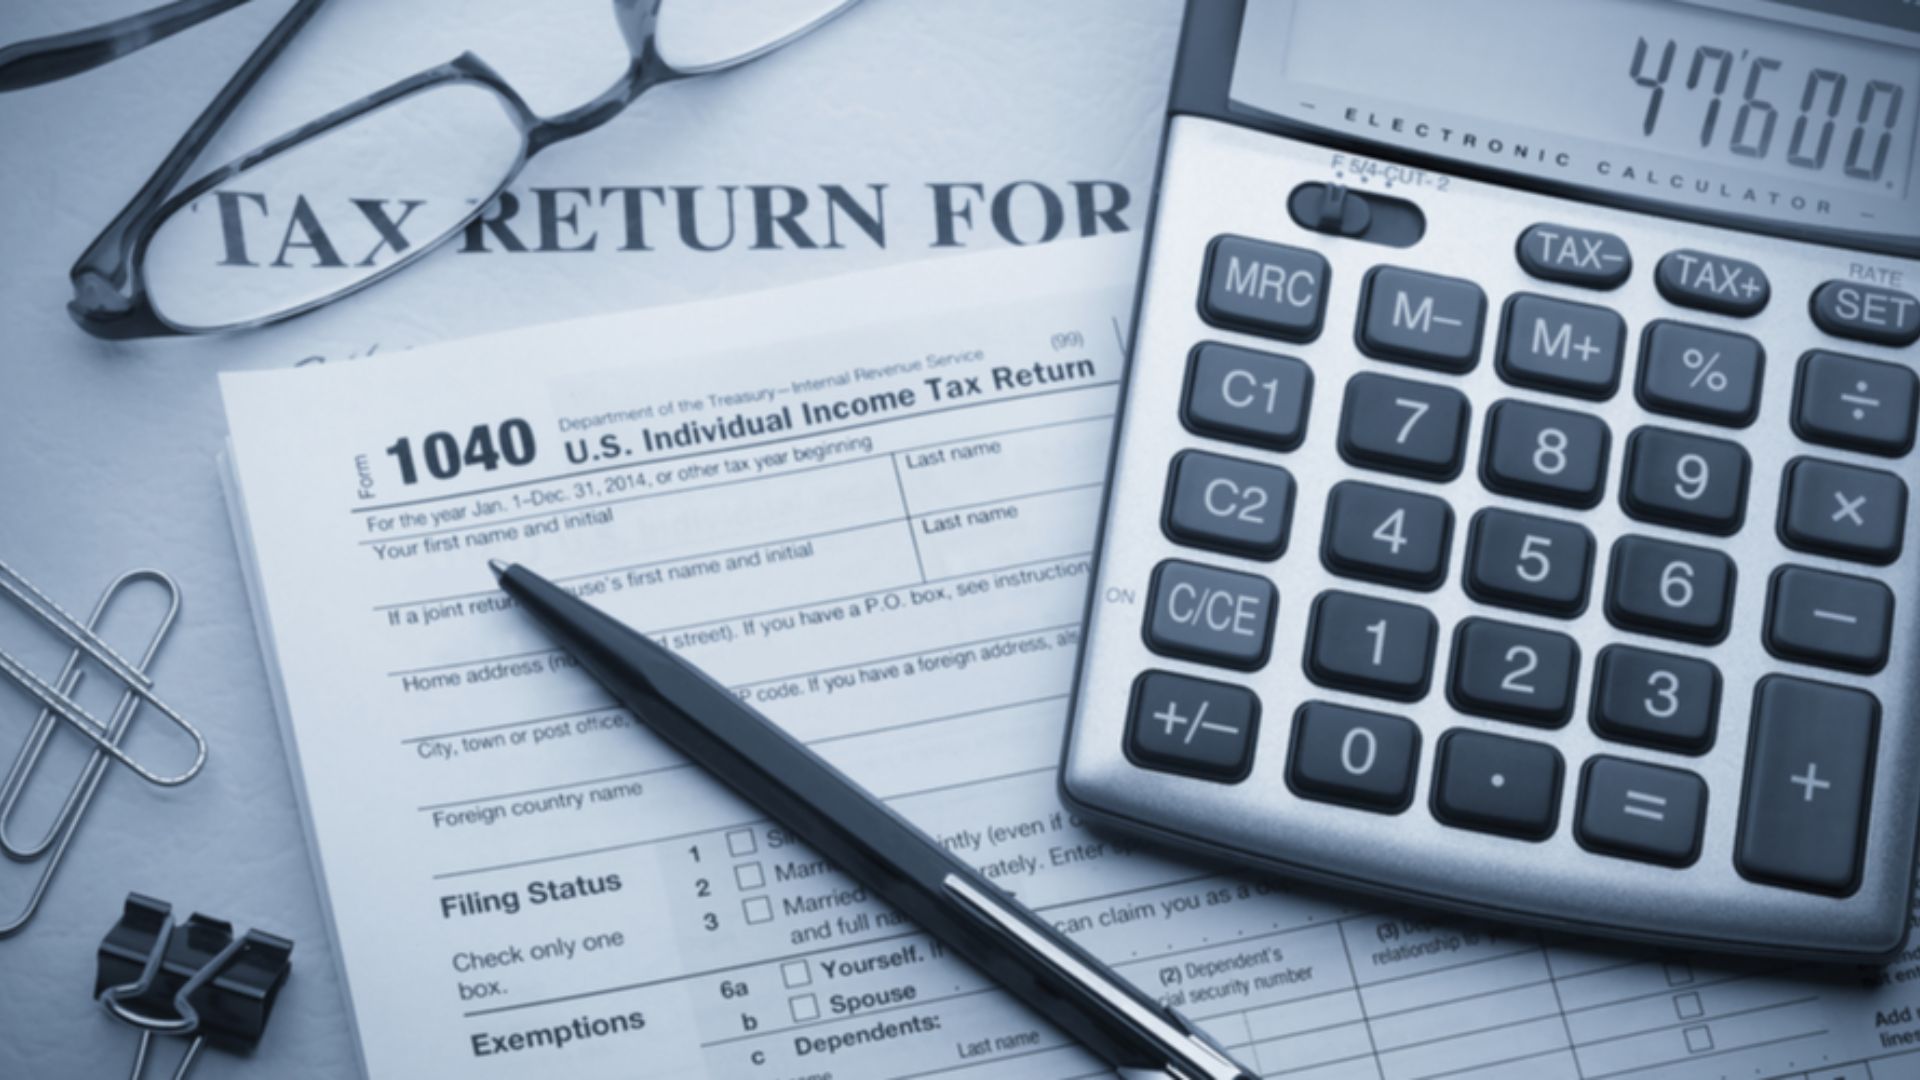 Don’t File Without This! Top Tips to Review Your Form 16 for ITR